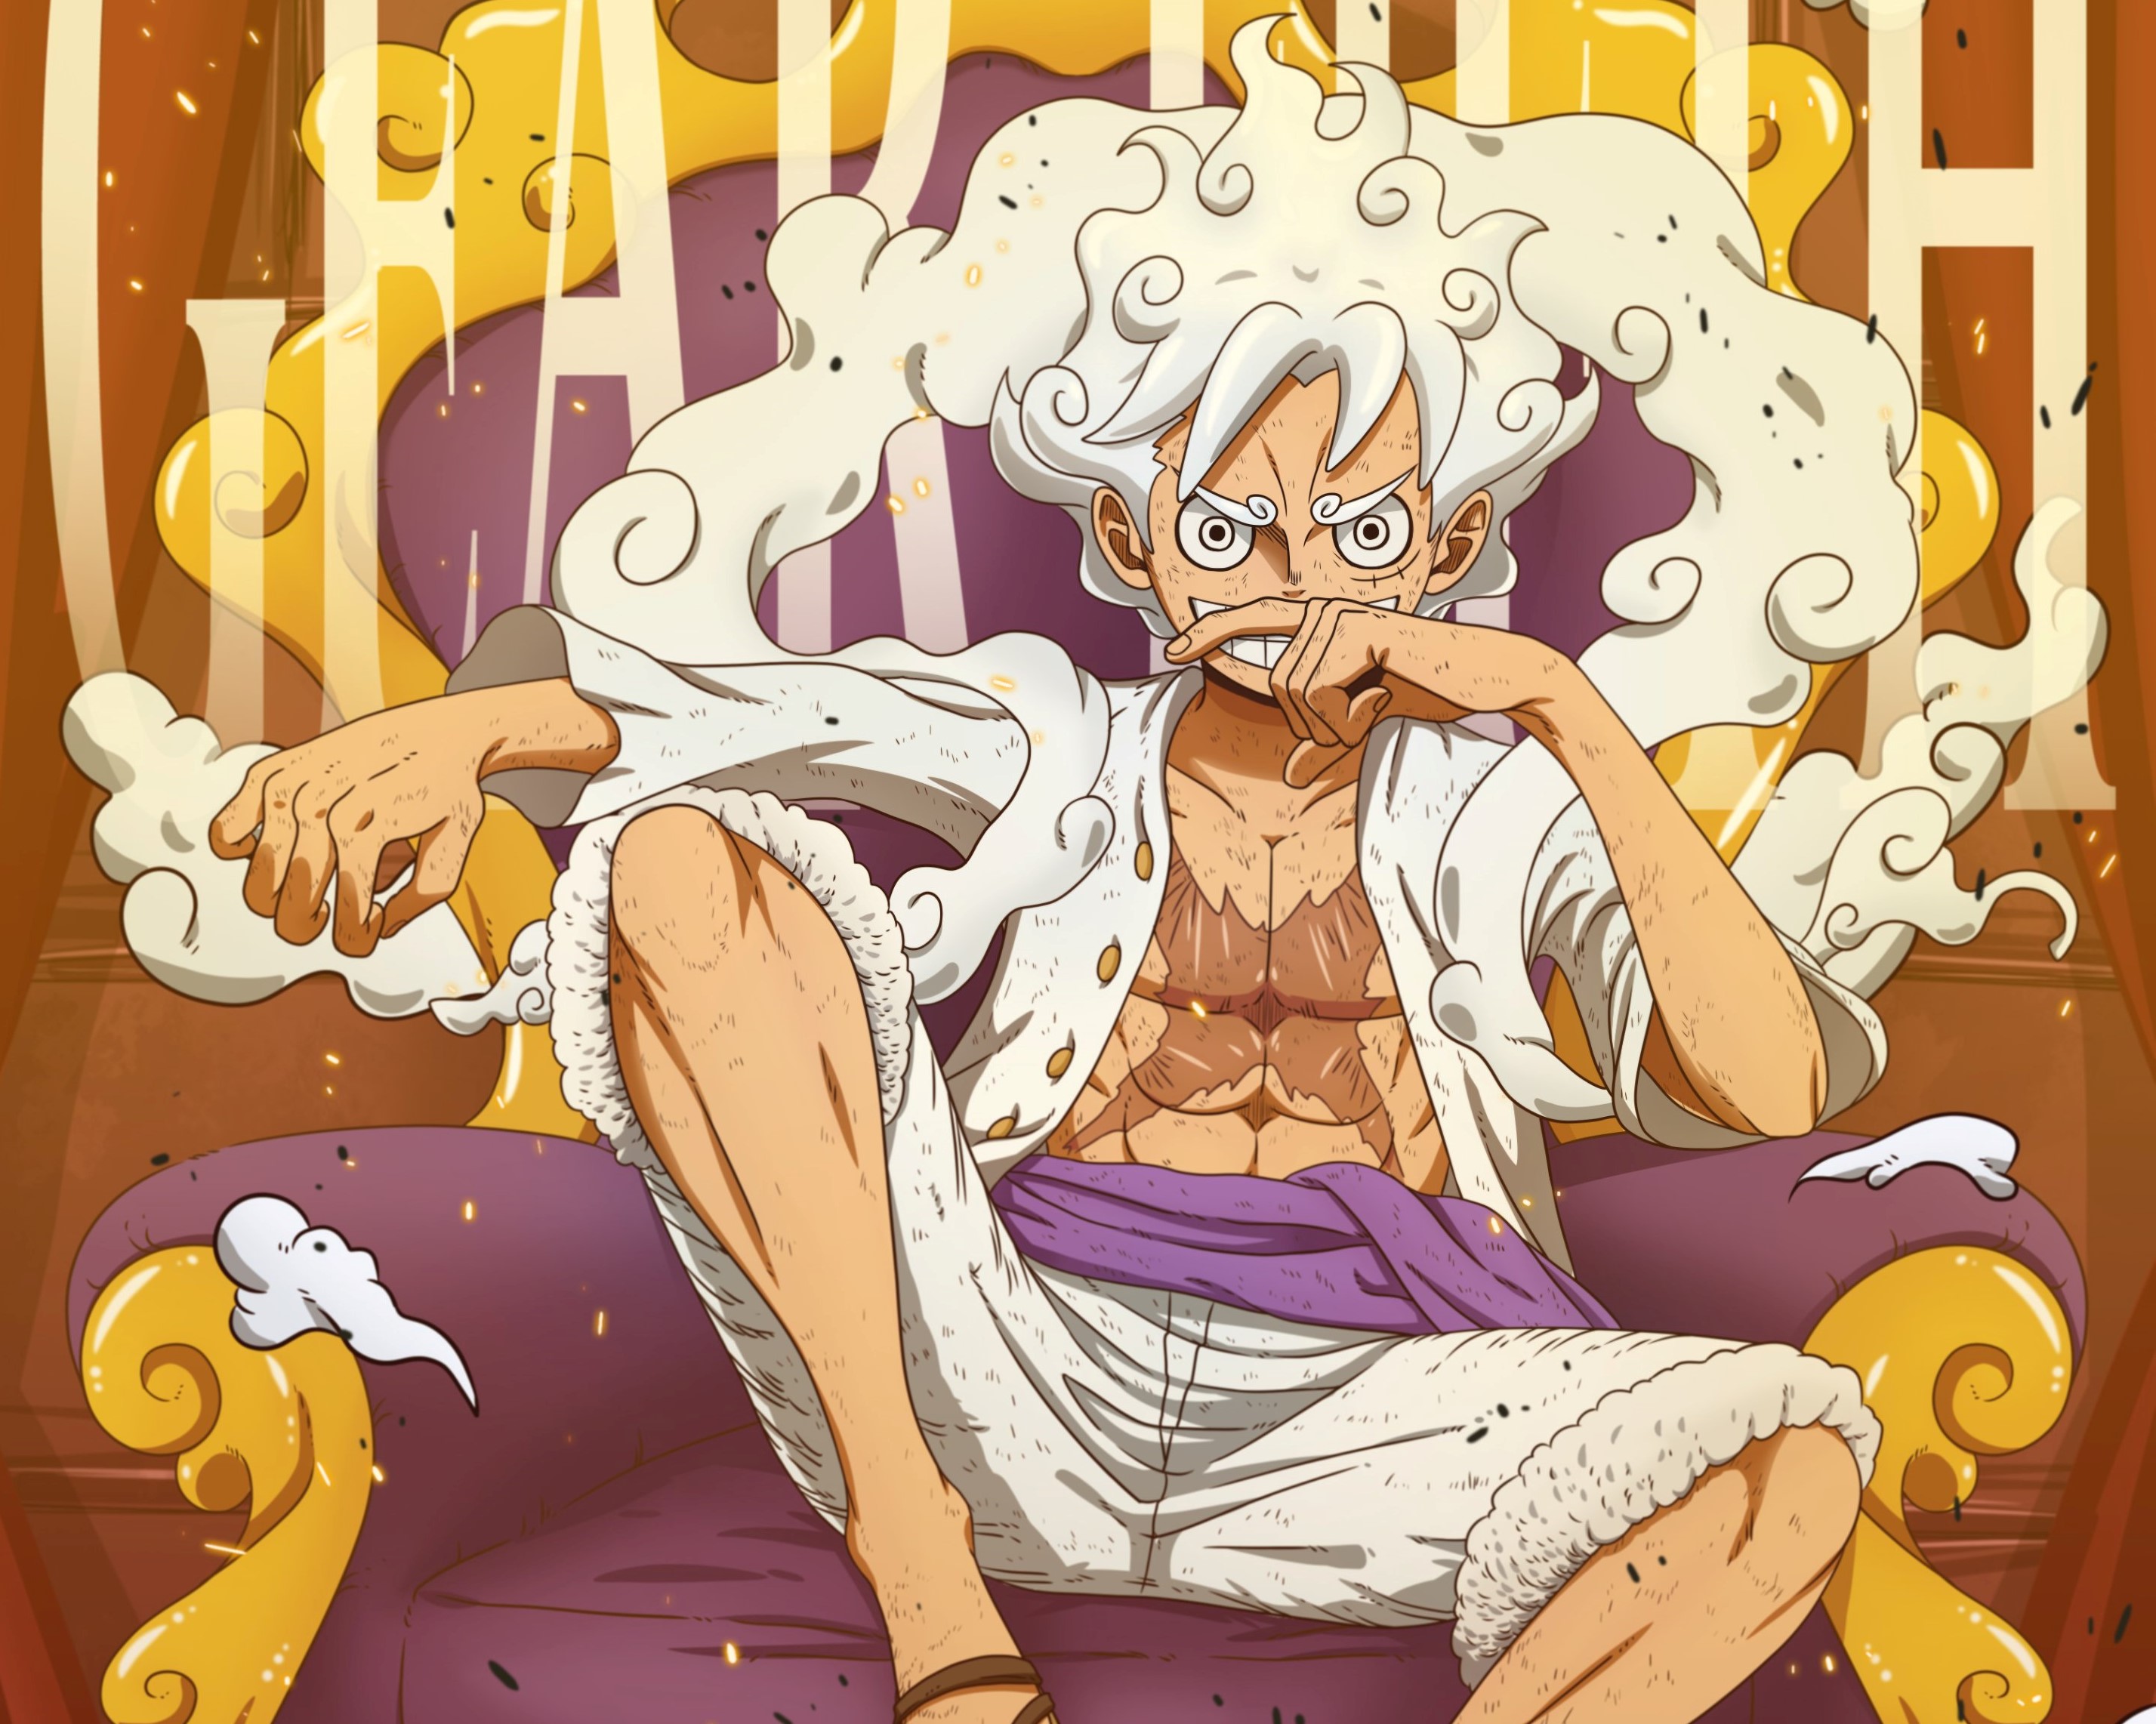 Download Gear 5 (One Piece) wallpapers for mobile phone, free Gear 5  (One Piece) HD pictures